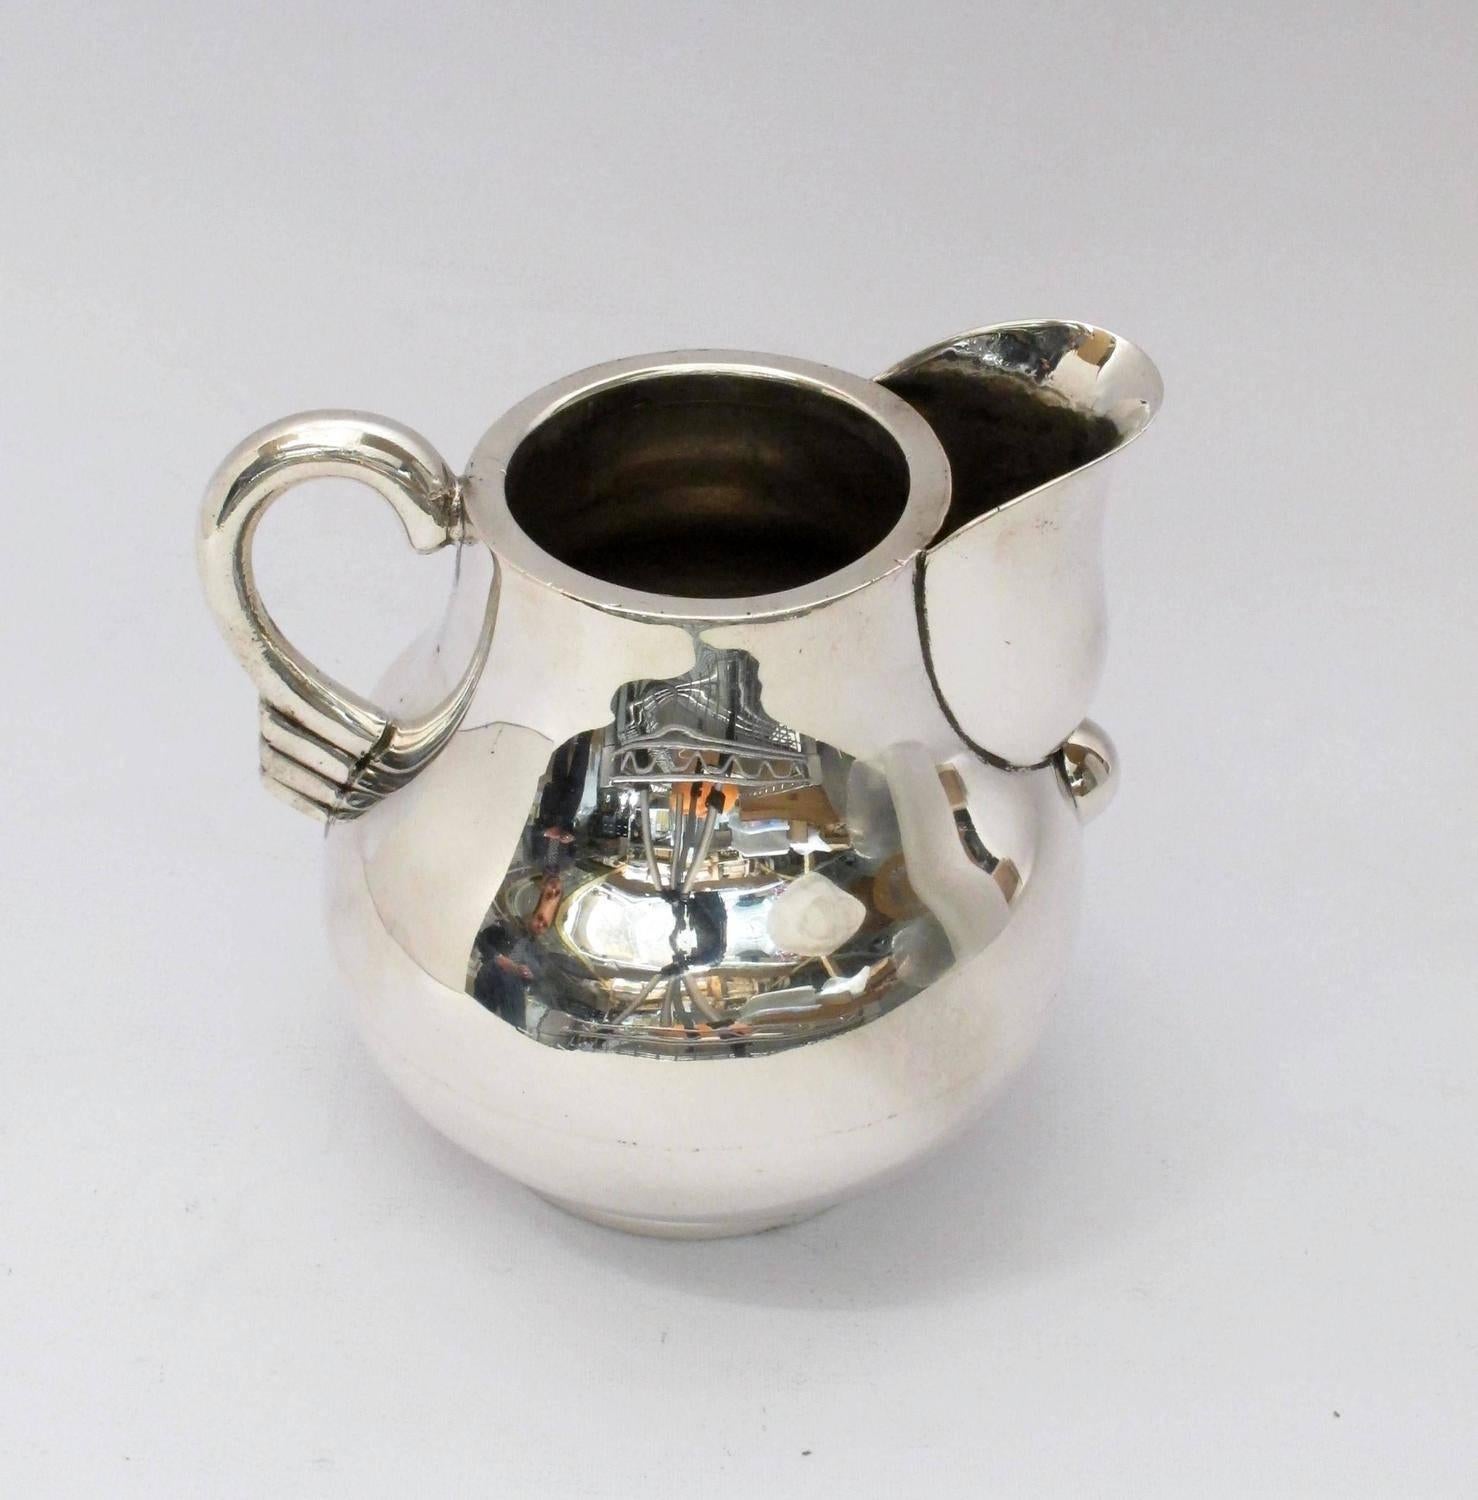 1950s Hector Aguilar Silver Tea and Coffee Set In Excellent Condition For Sale In Santa Fe, NM